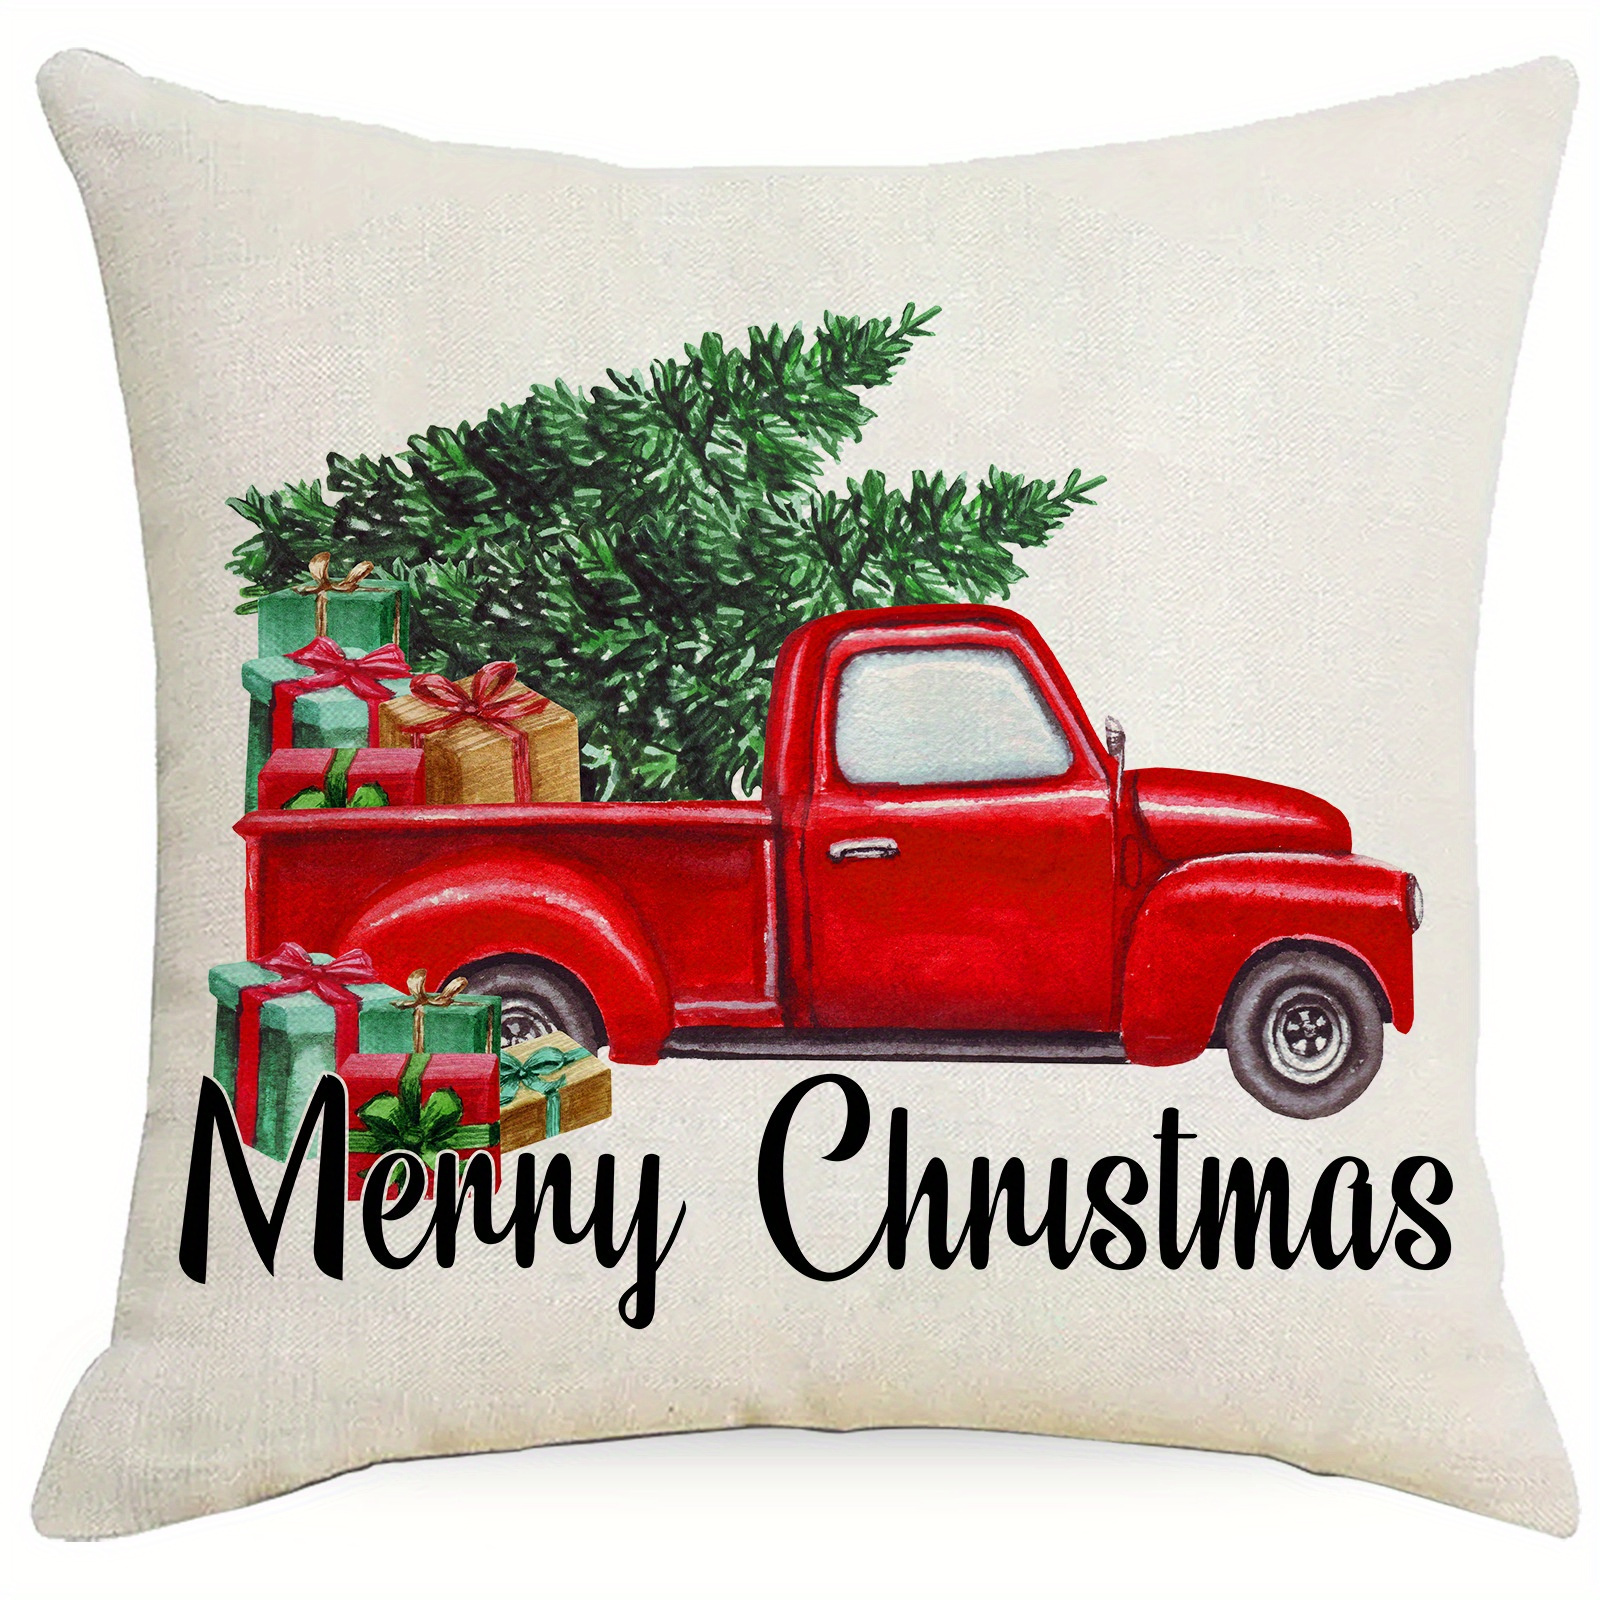 Christmas Pillow Covers 17.7x17.7 For Christmas Decorations Snowman Elk Christmas  Pillows Winter Holiday Throw Pillows Christmas Farmhouse Decor For Couch  Home Decor, Room Decor, Bedroom Decor, Living Room Decor (cushion Is Not